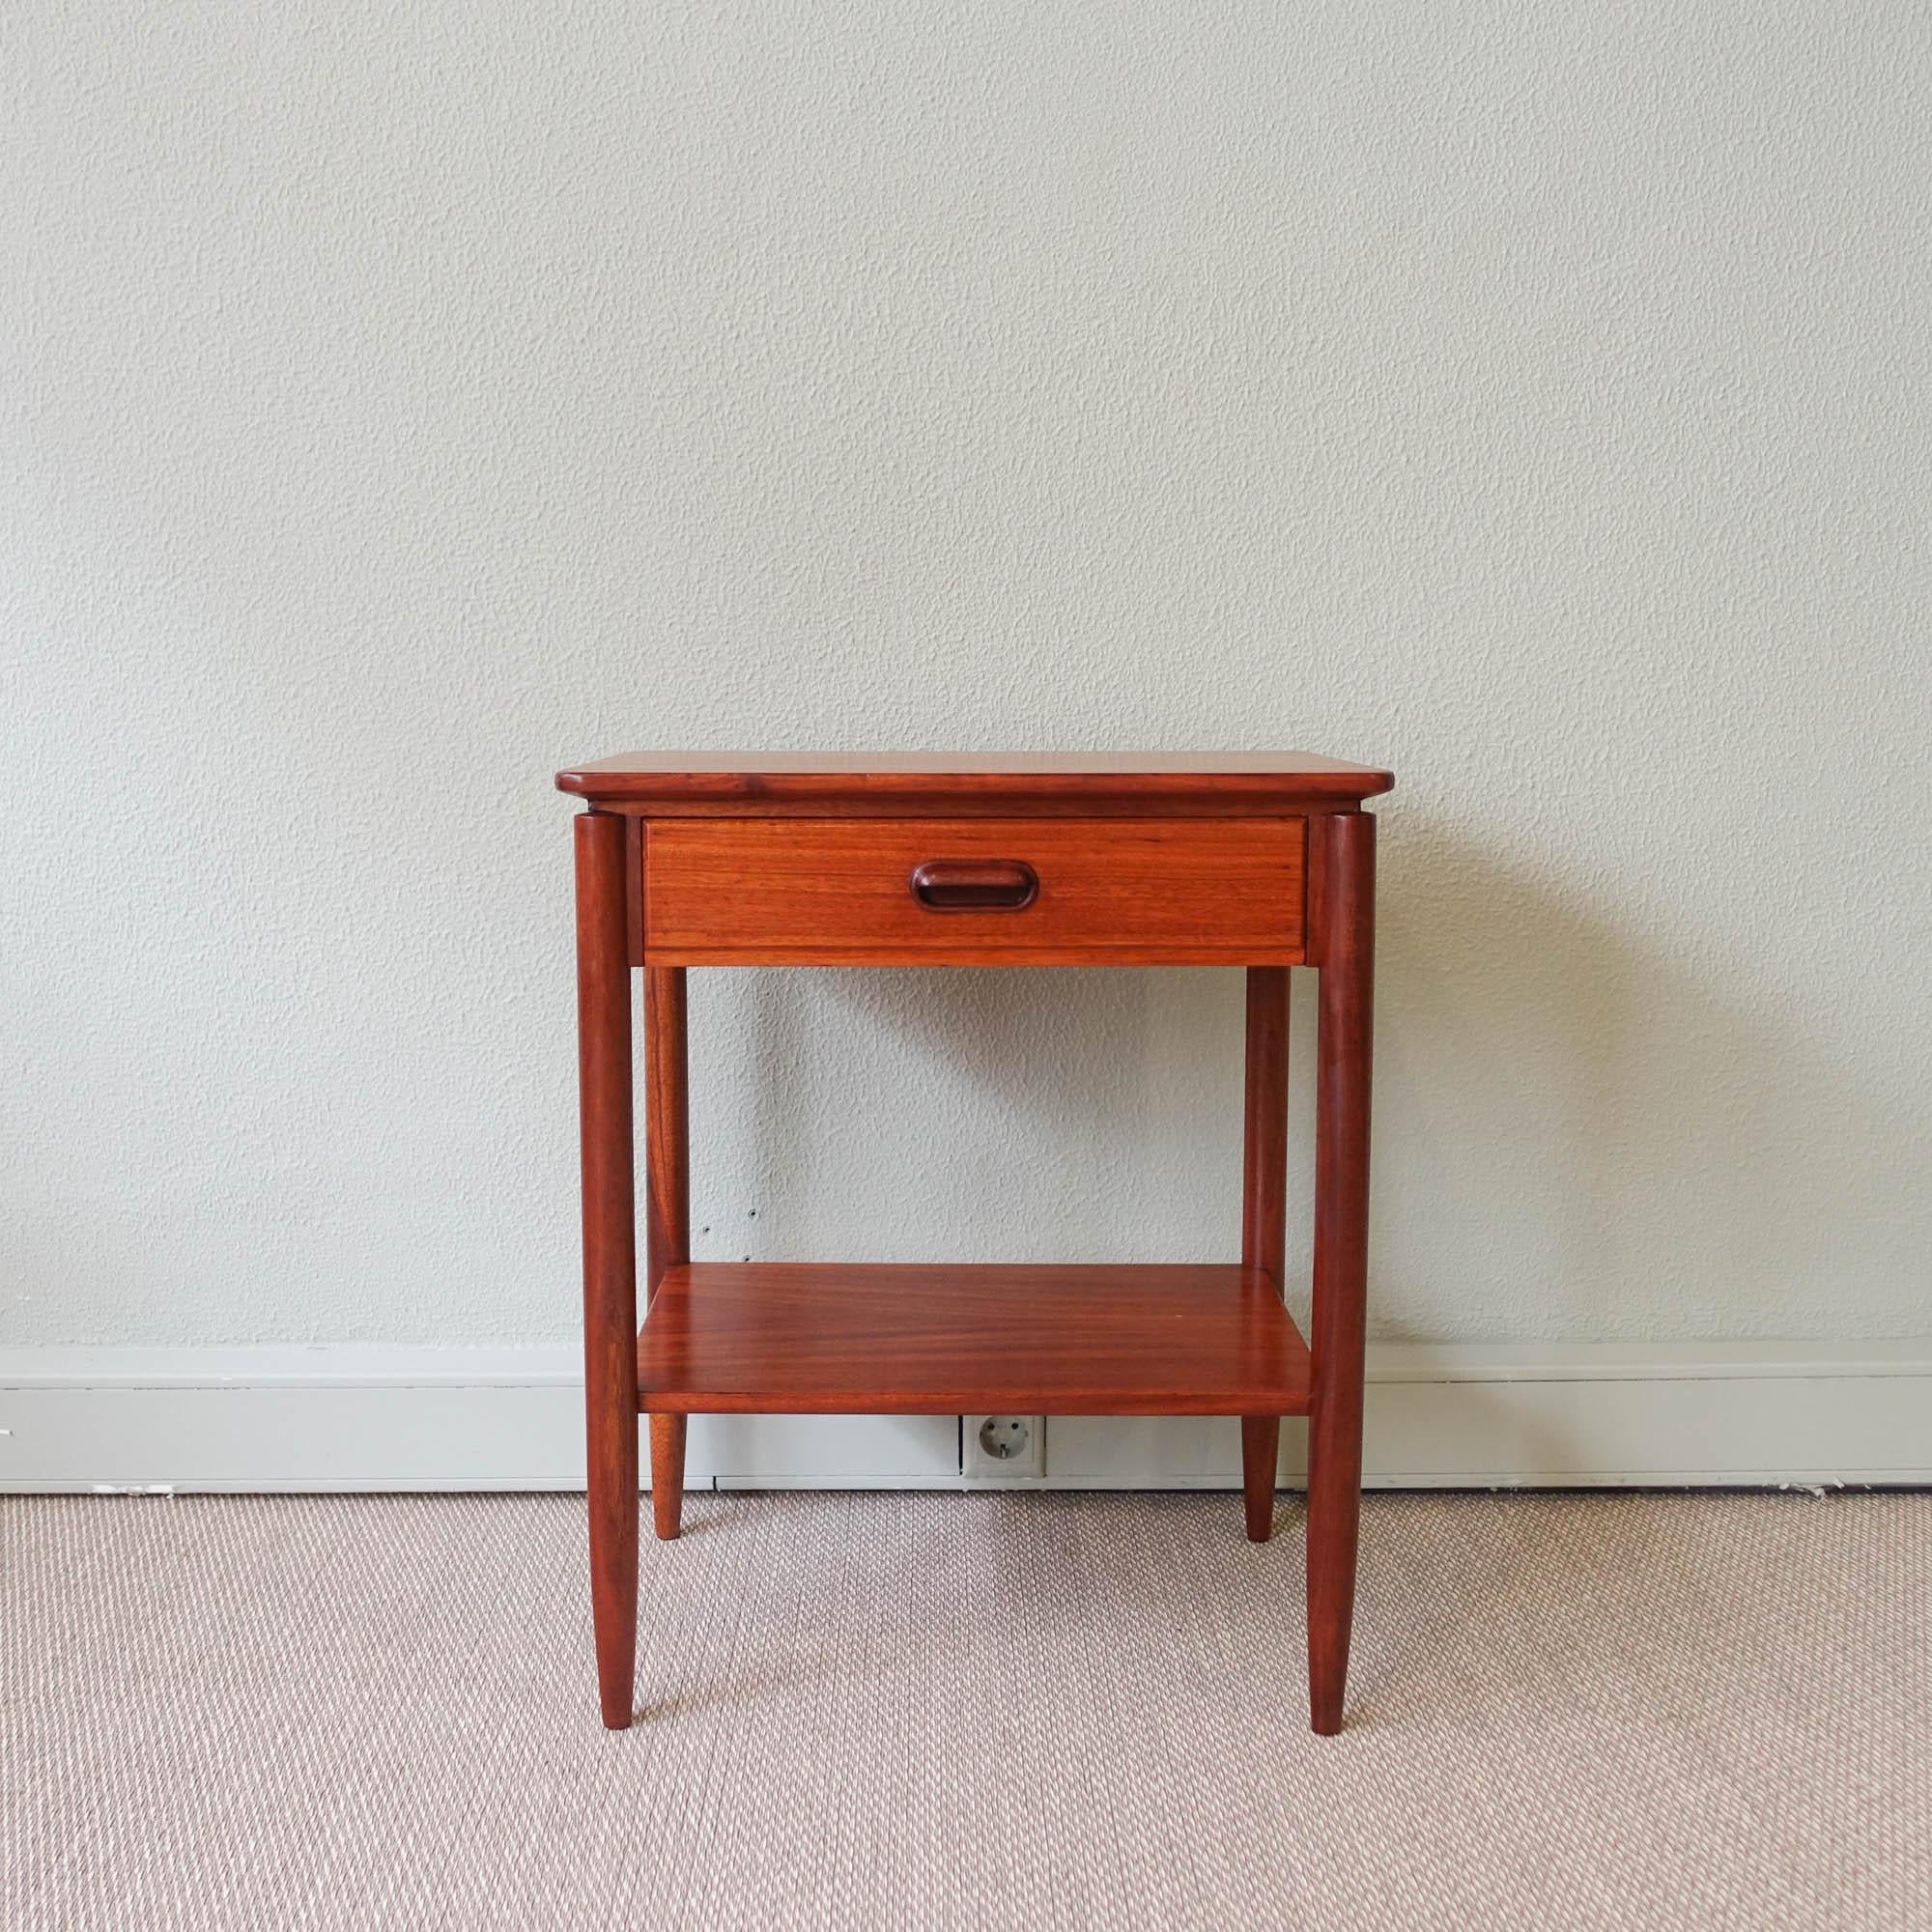 This bedside table was designed and produced by Móveis Olaio in Portugal during the 1960's. It is made of mutenye wood and features one drawer with a wood handle in a darker wood. It was completely restored.